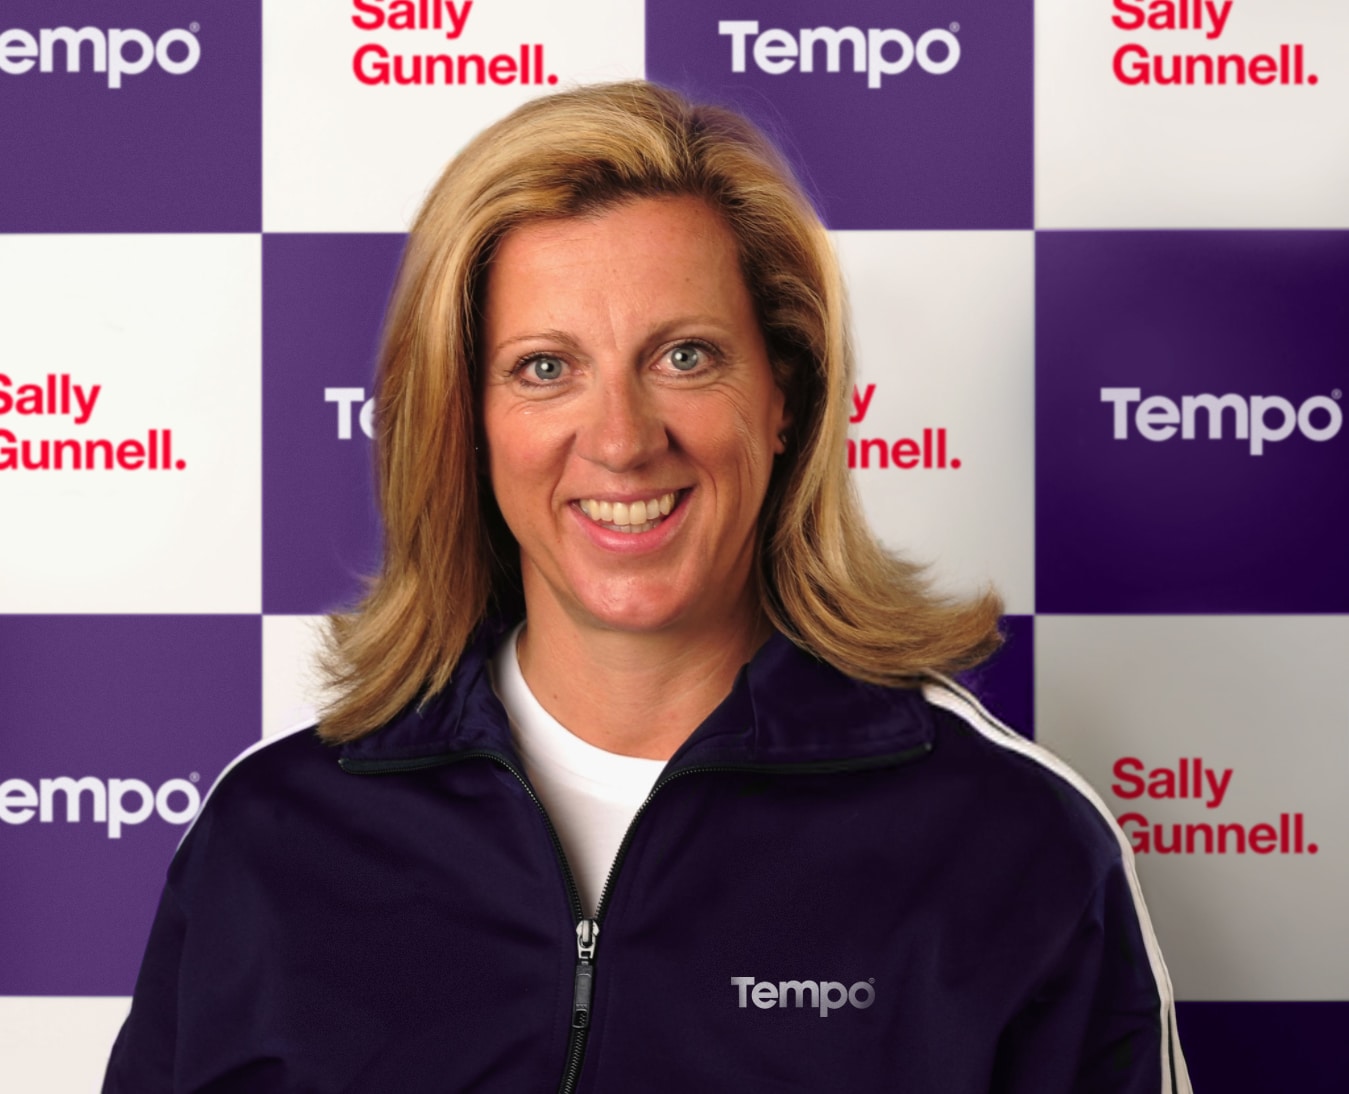 Sally gunnell joins tempo